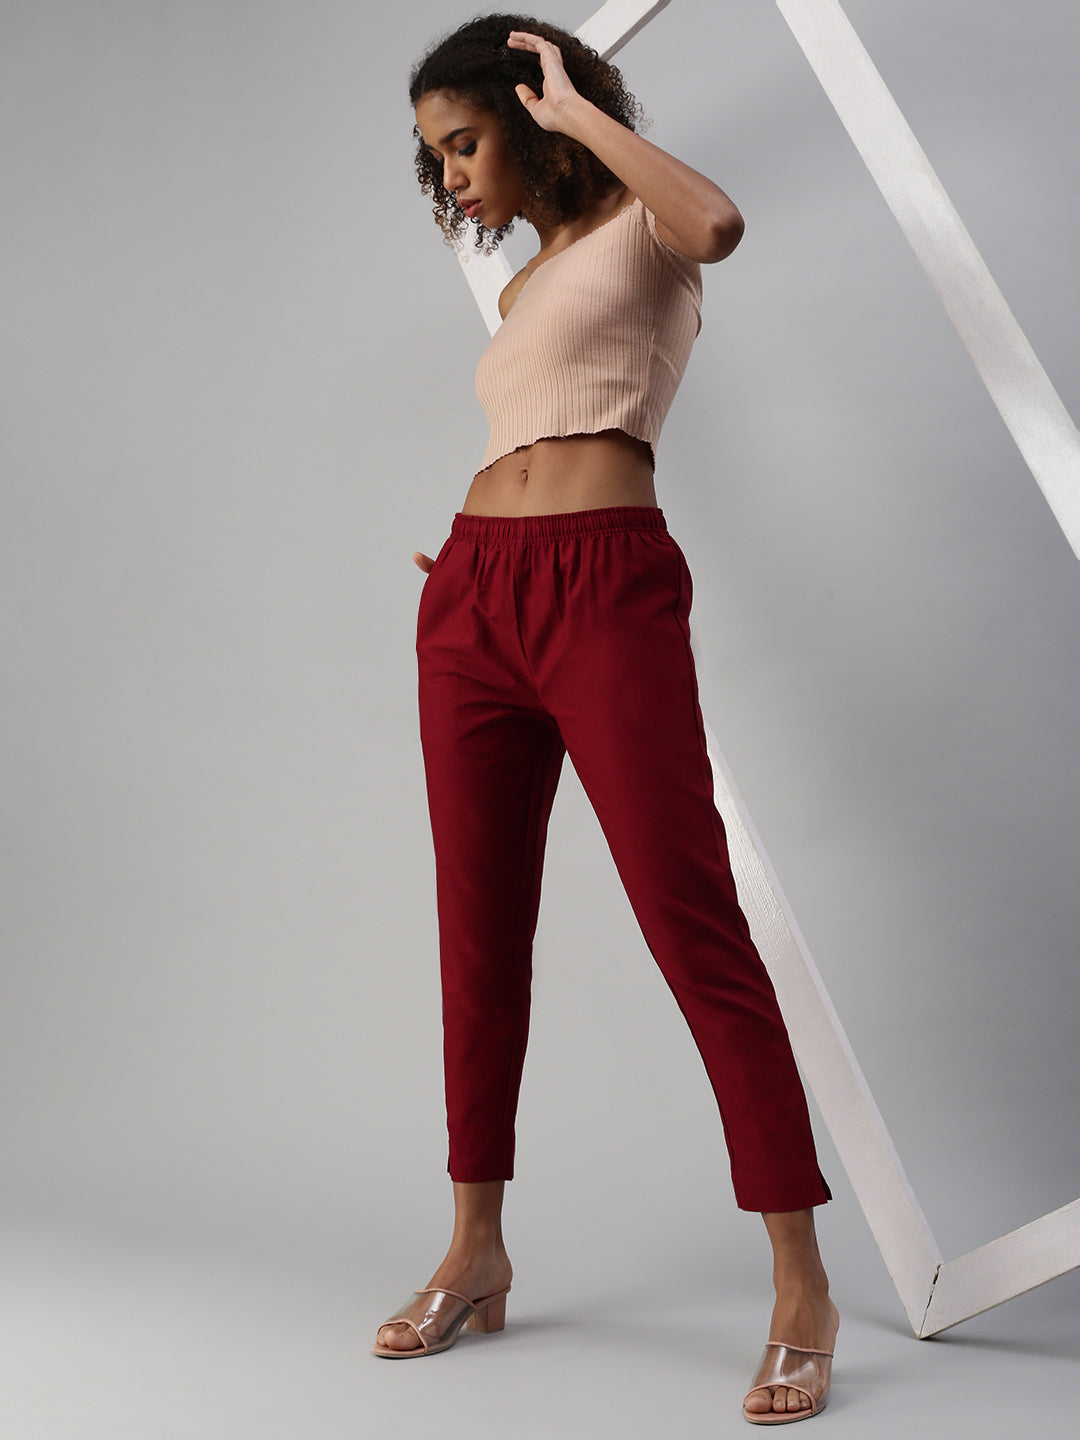 Wide-Leg Trousers Four Ways for Work - Pumps & Push Ups | Wide leg pants  outfit work, Wide leg trousers outfit, Wide leg outfit